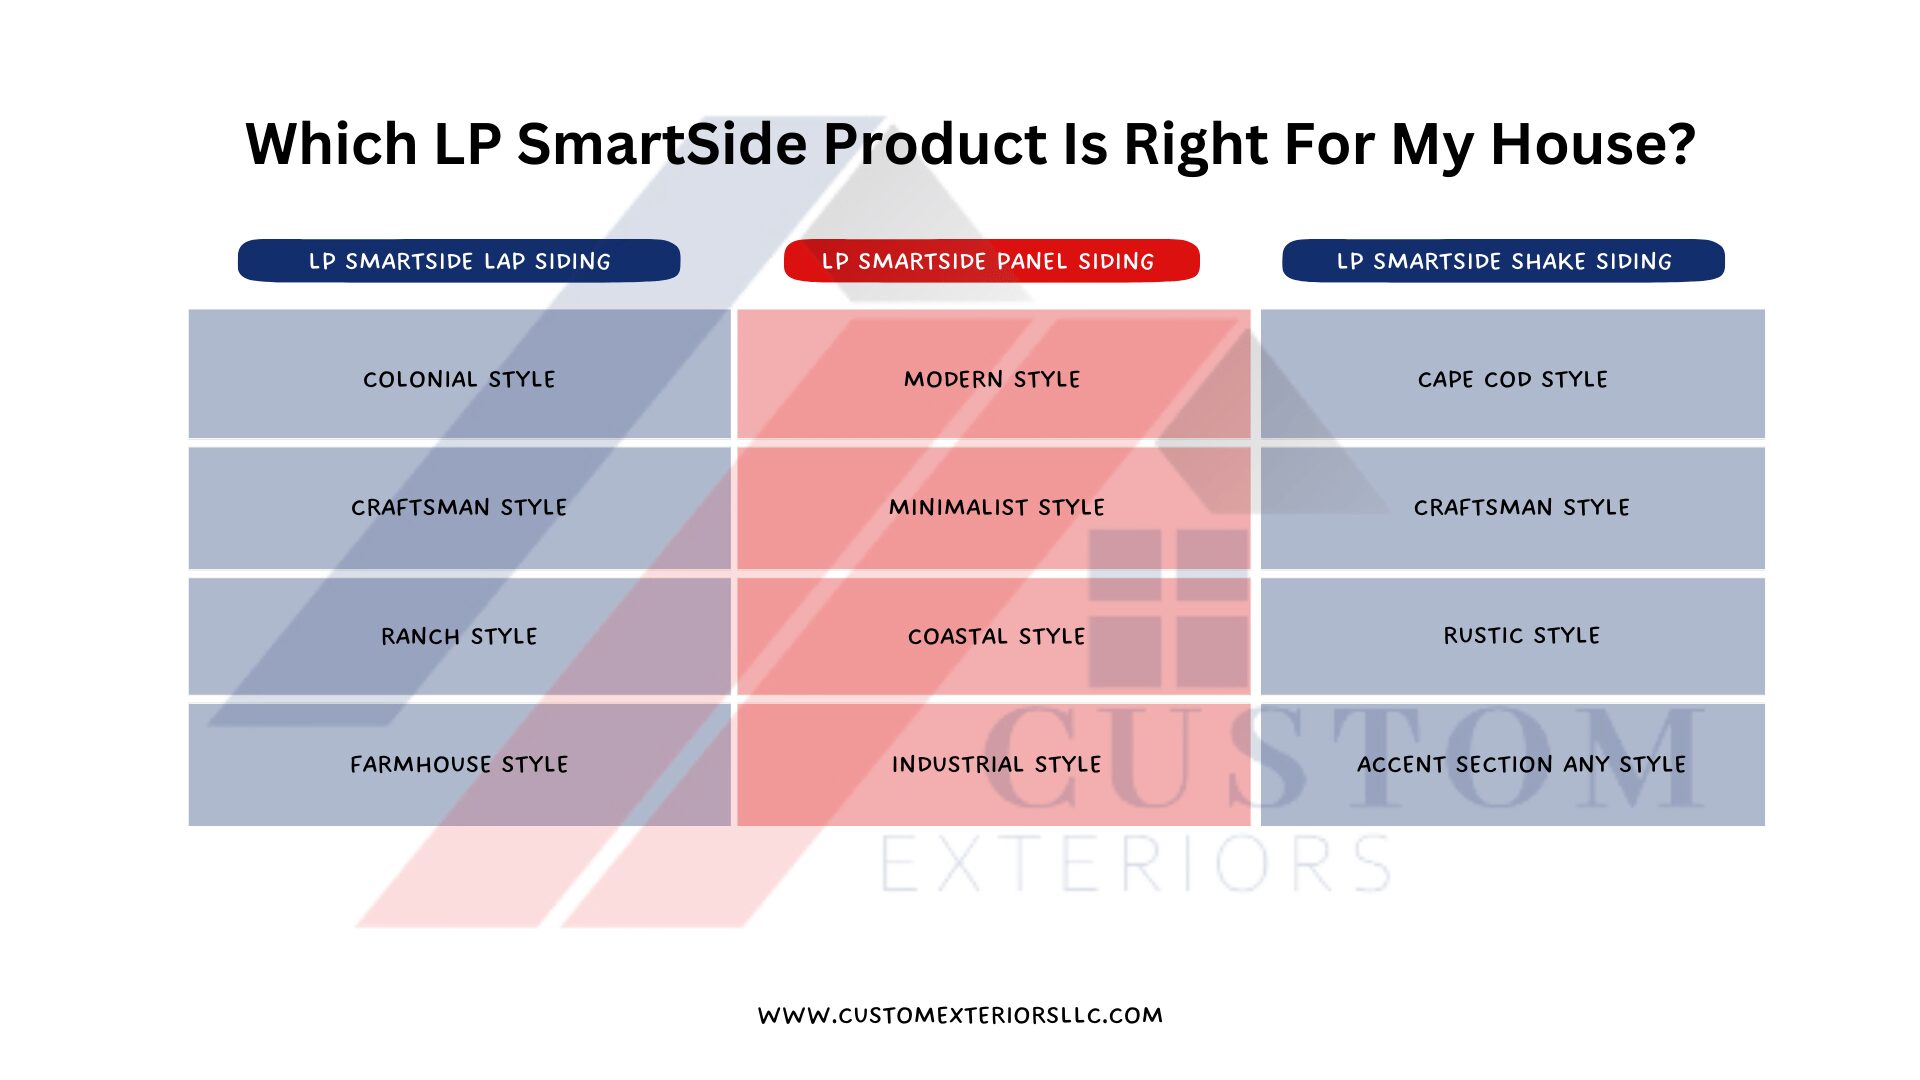 Infographic created by Custom Exteriors to help explain which style of home works with which style of lp smartside siding